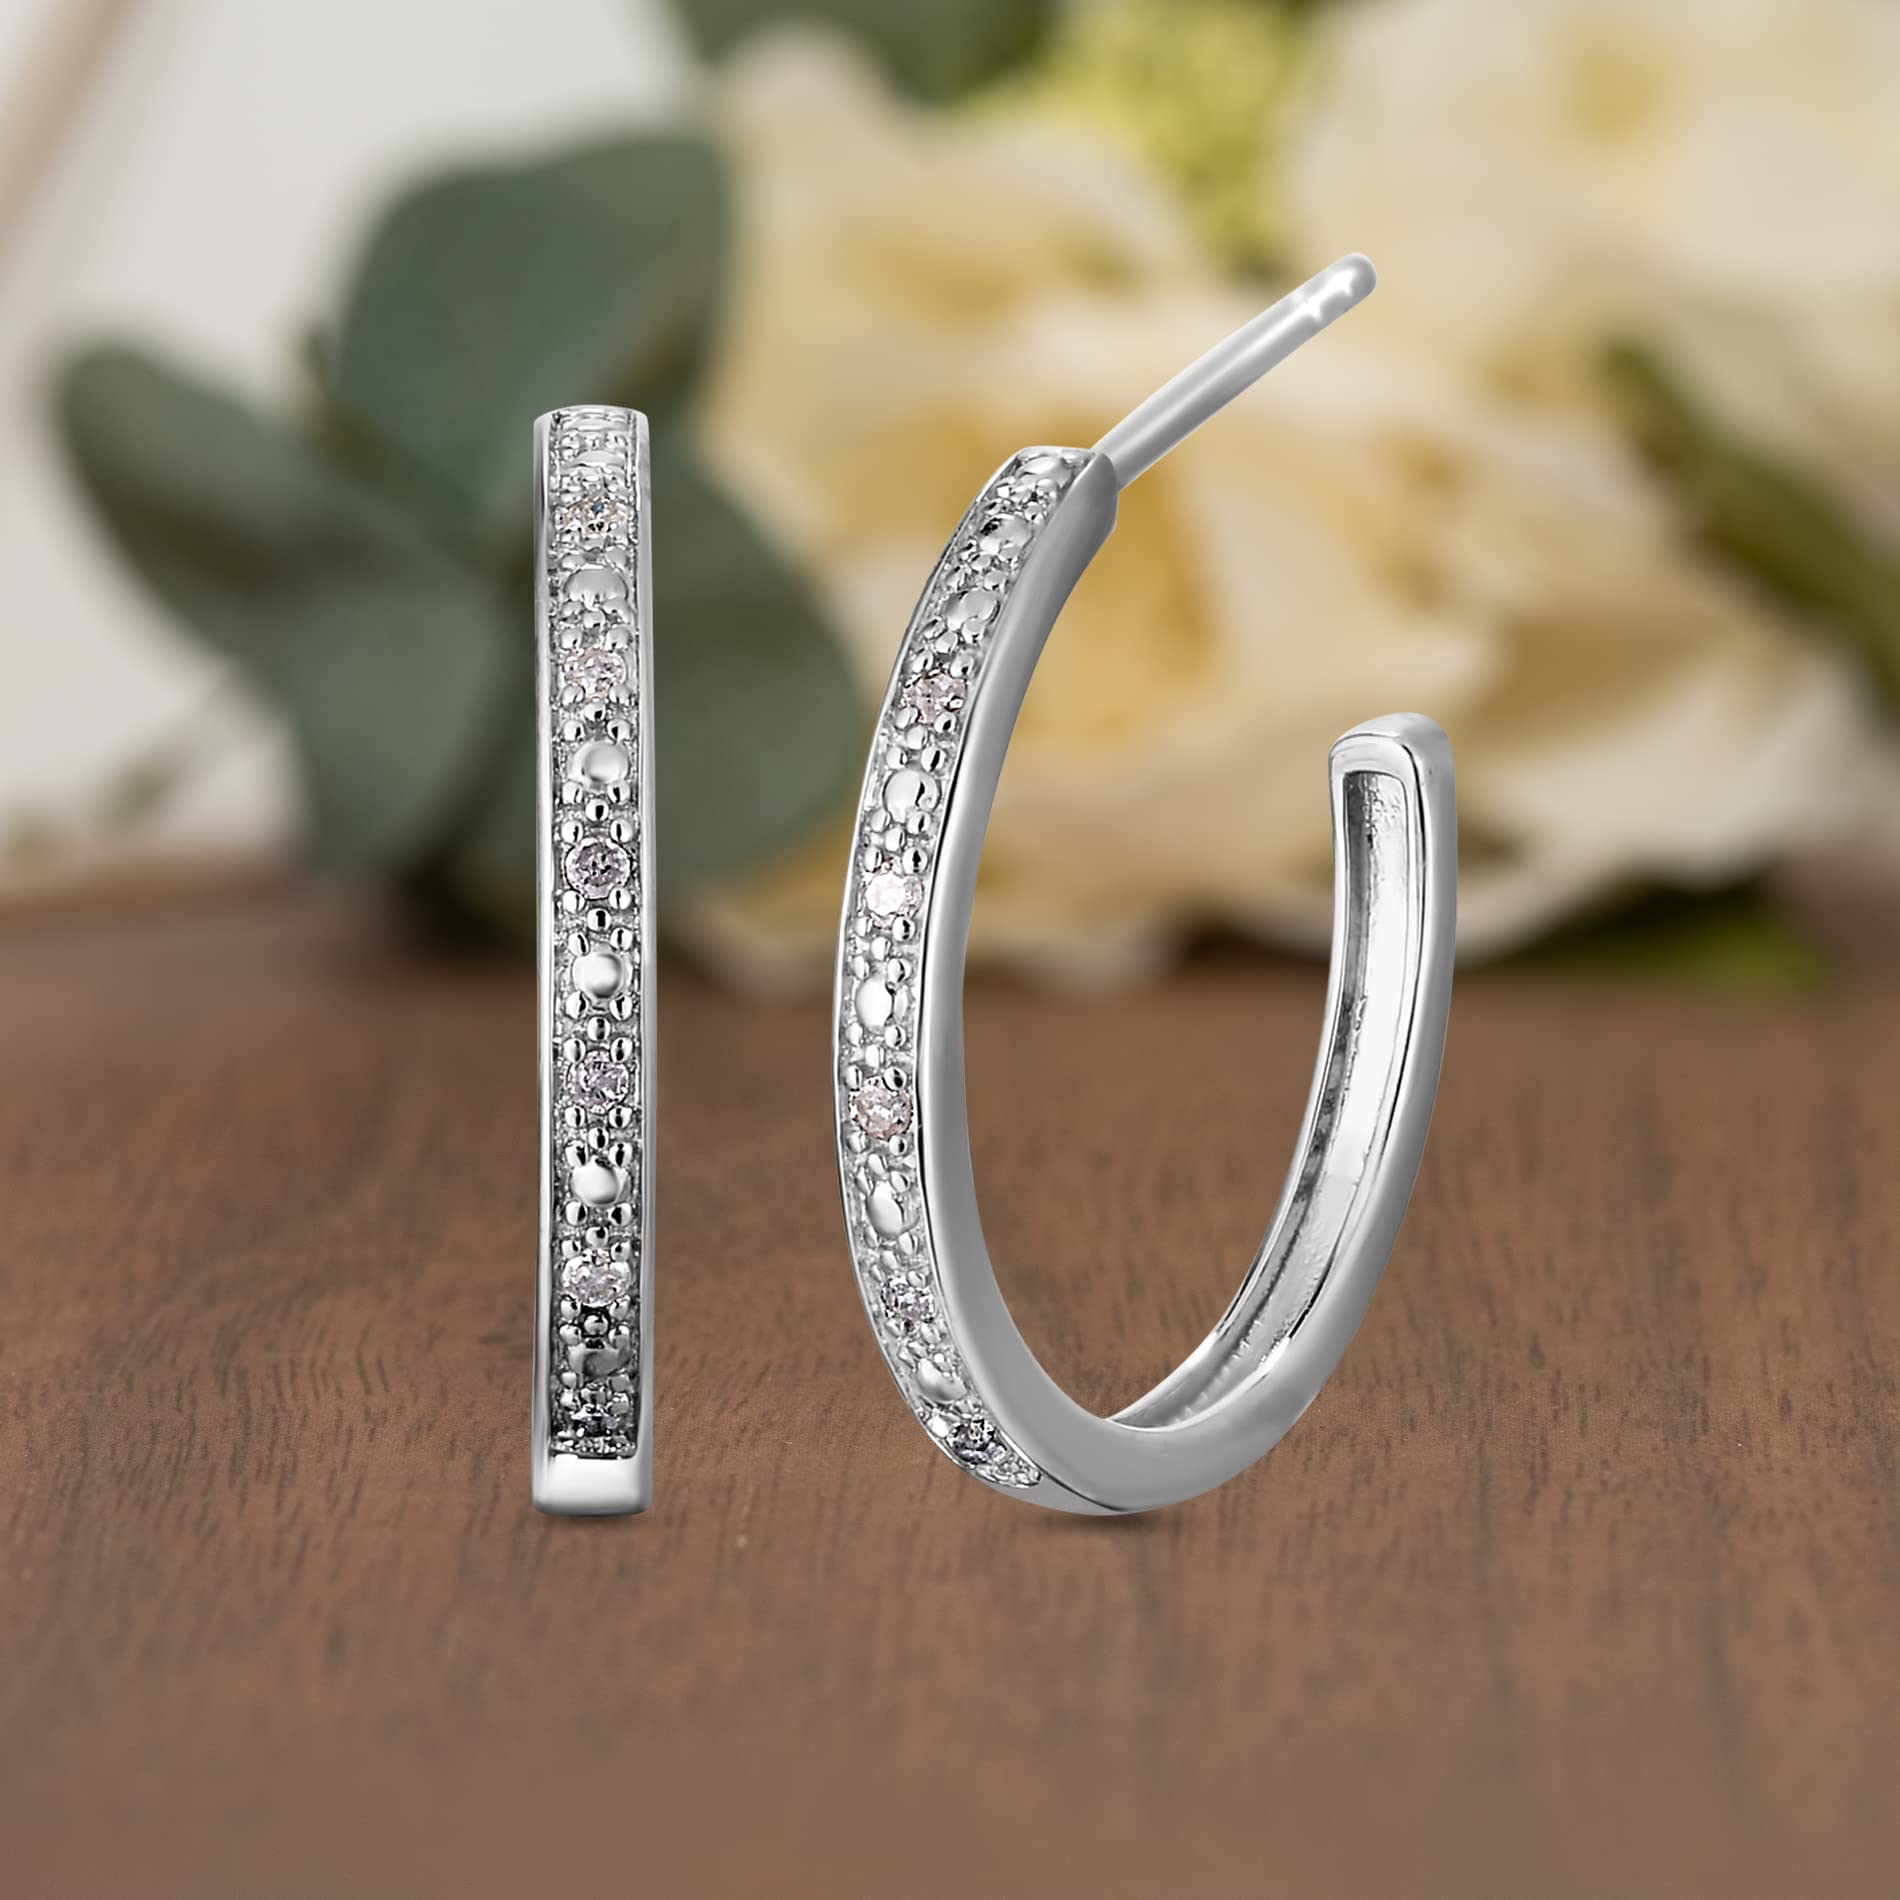 Natalia Drake Small Open C Diamond Accent Hoop Earrings for Women in Rhodium Plated Sterling Silver